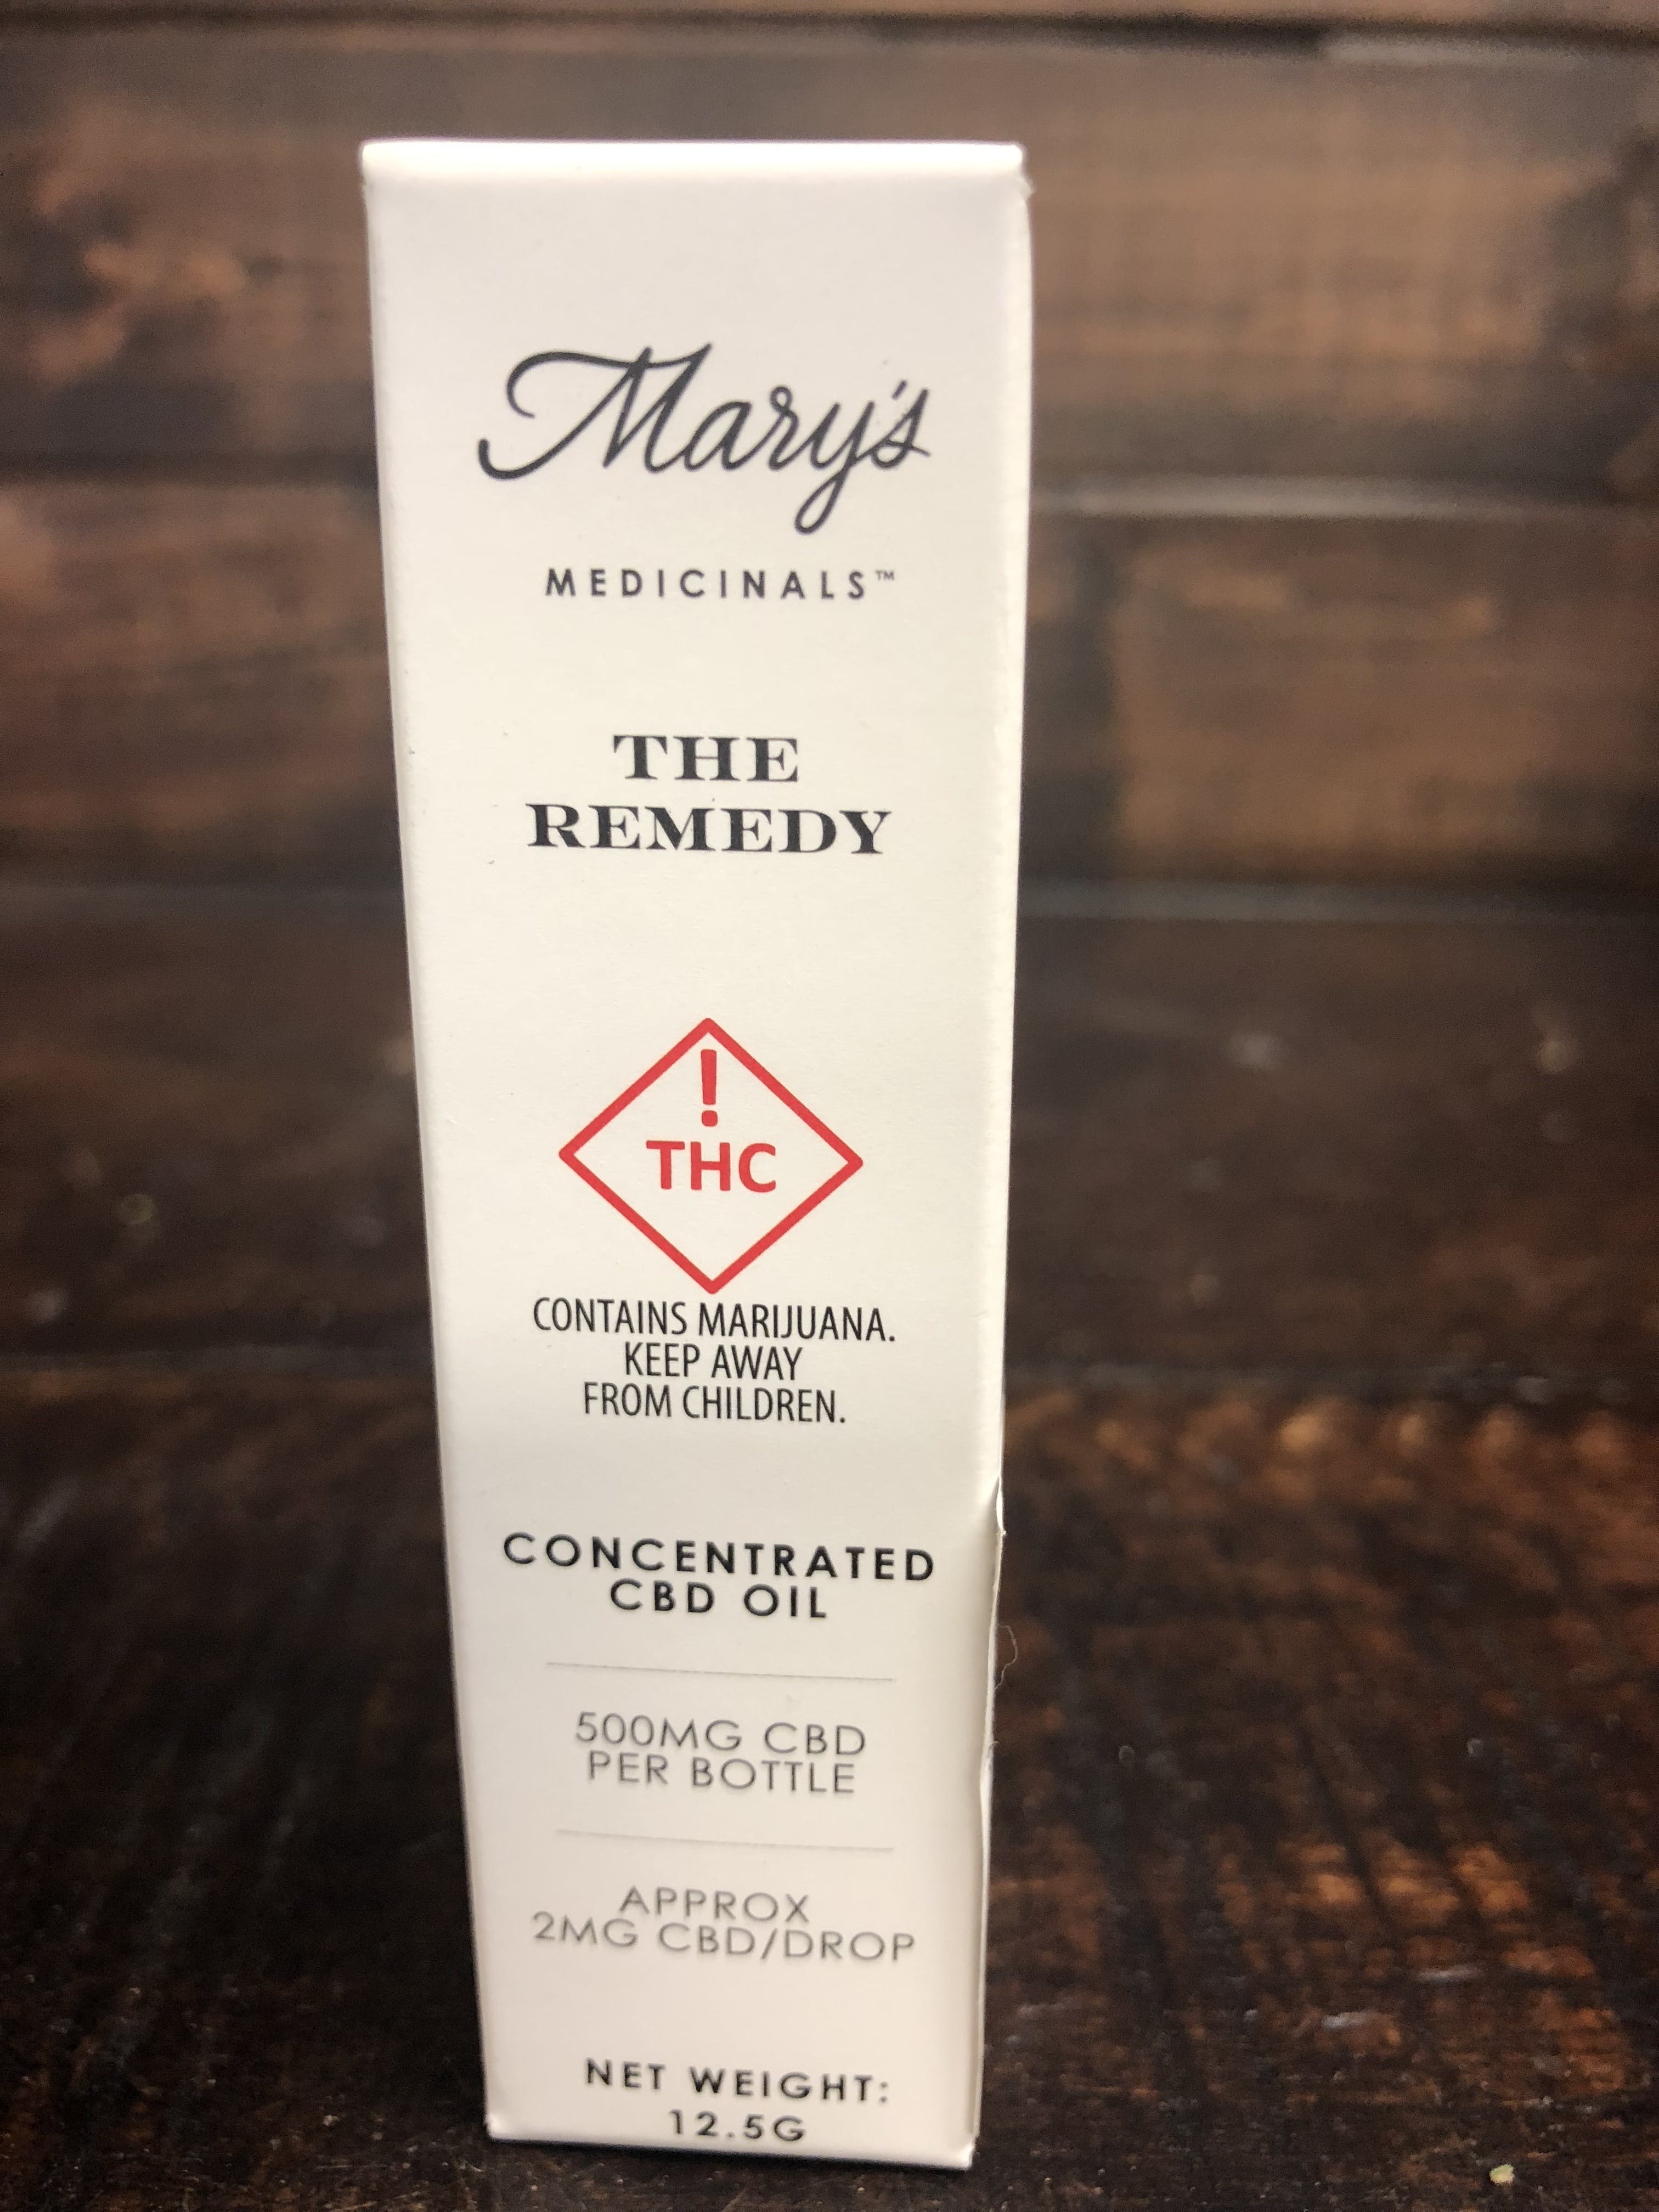 tincture-med-marys-medicinals-remedy-500mg-cbd-tincture